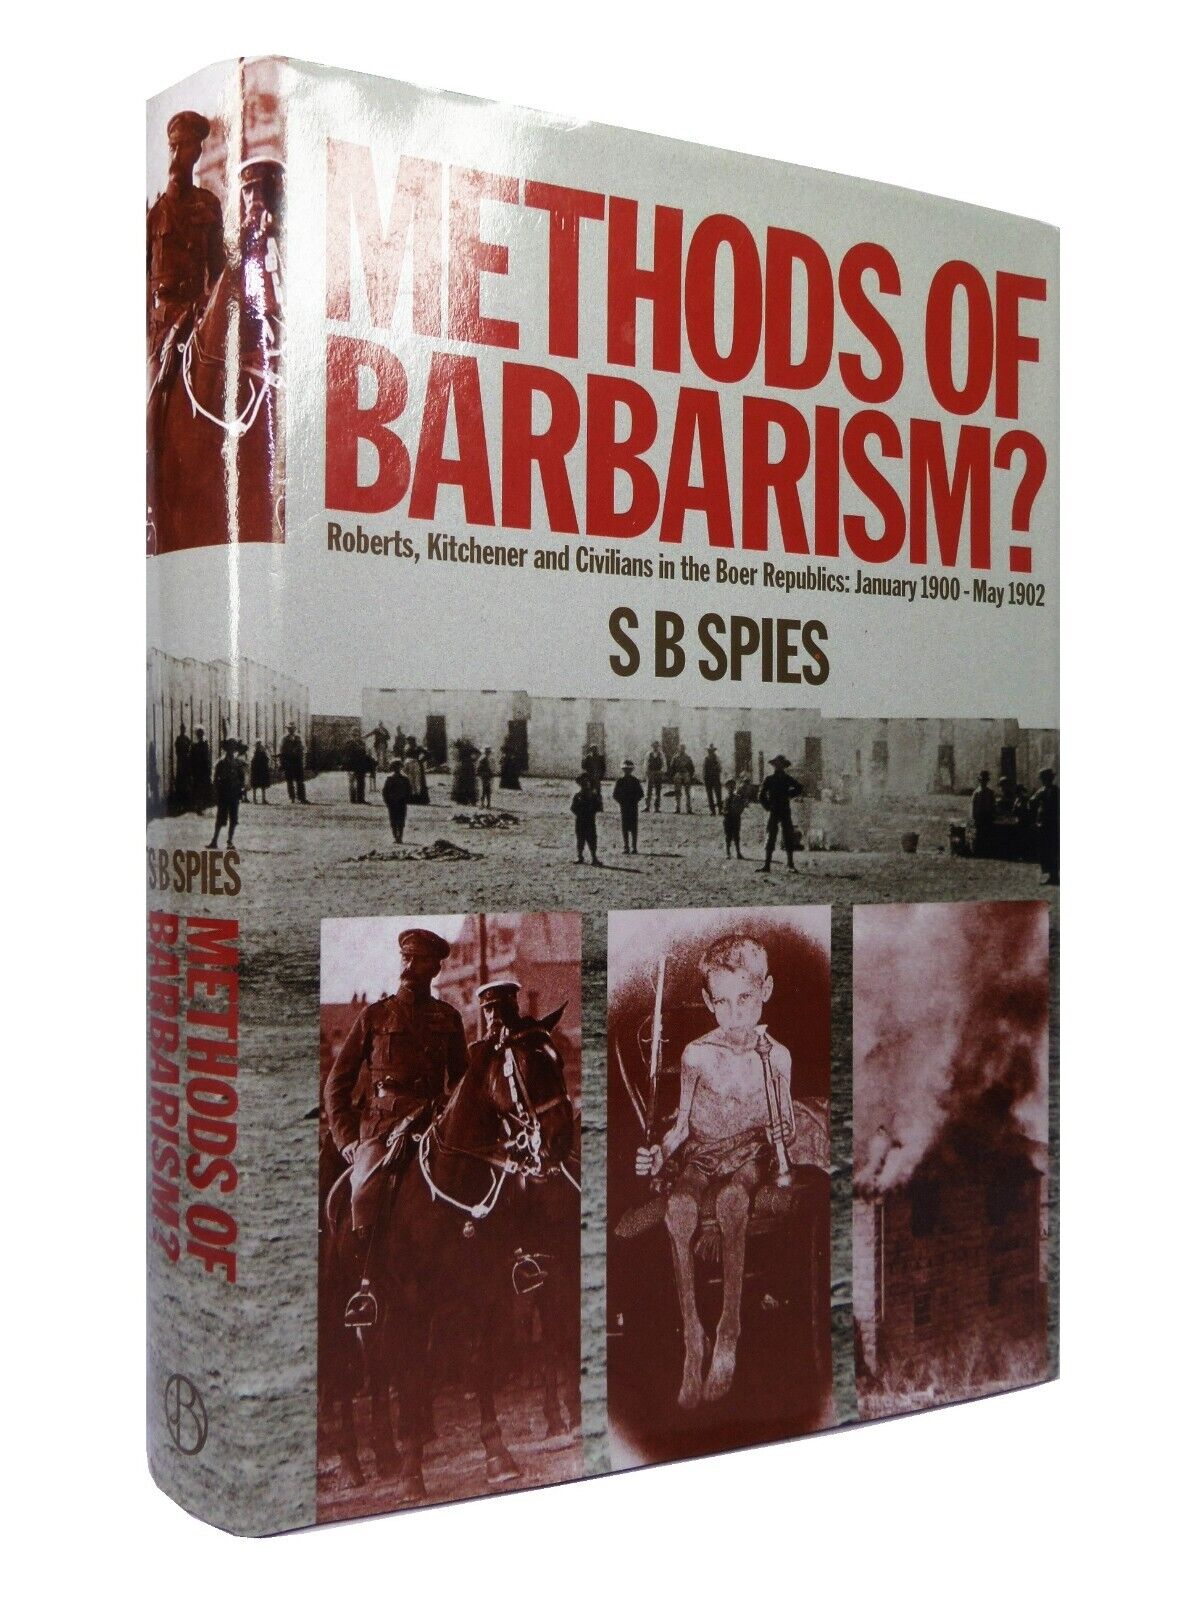 METHODS OF BARBARISM? ROBERTS AND KITCHENER AND CIVILIANS IN THE BOER REPUBLICS